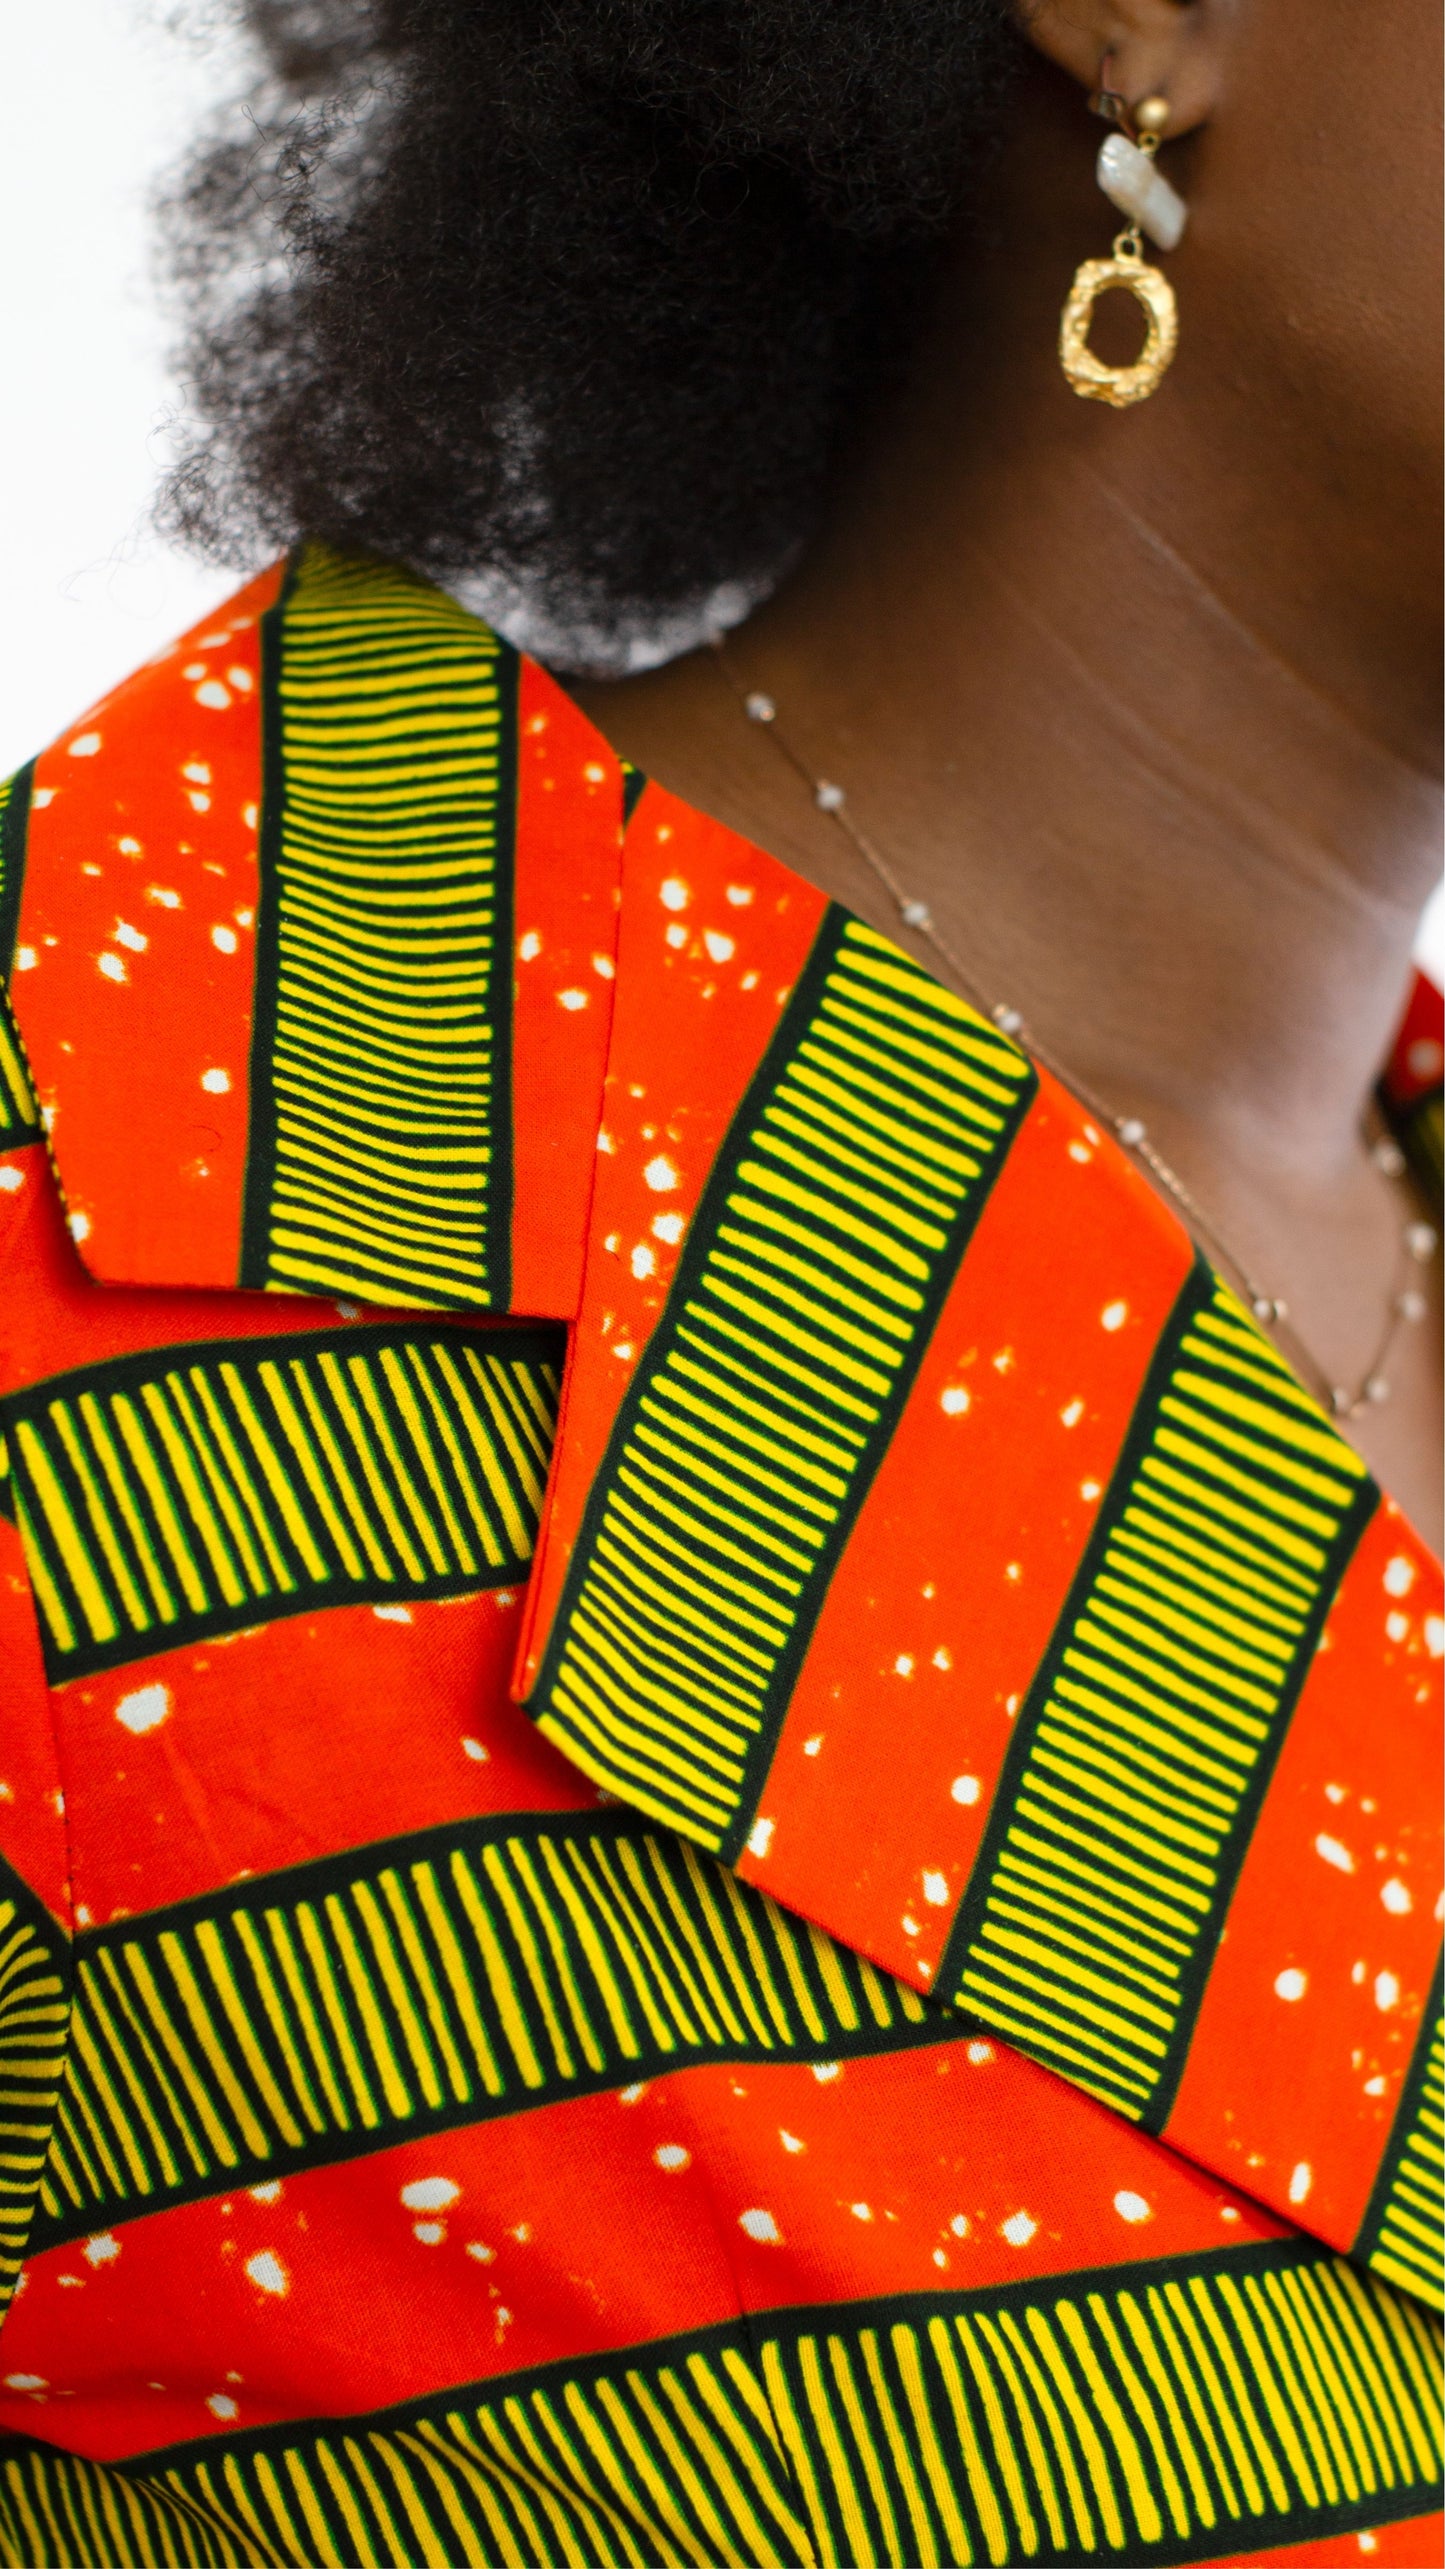 A close up showing the beautiful details of an orange striped print dress, paired with an elegant necklace.